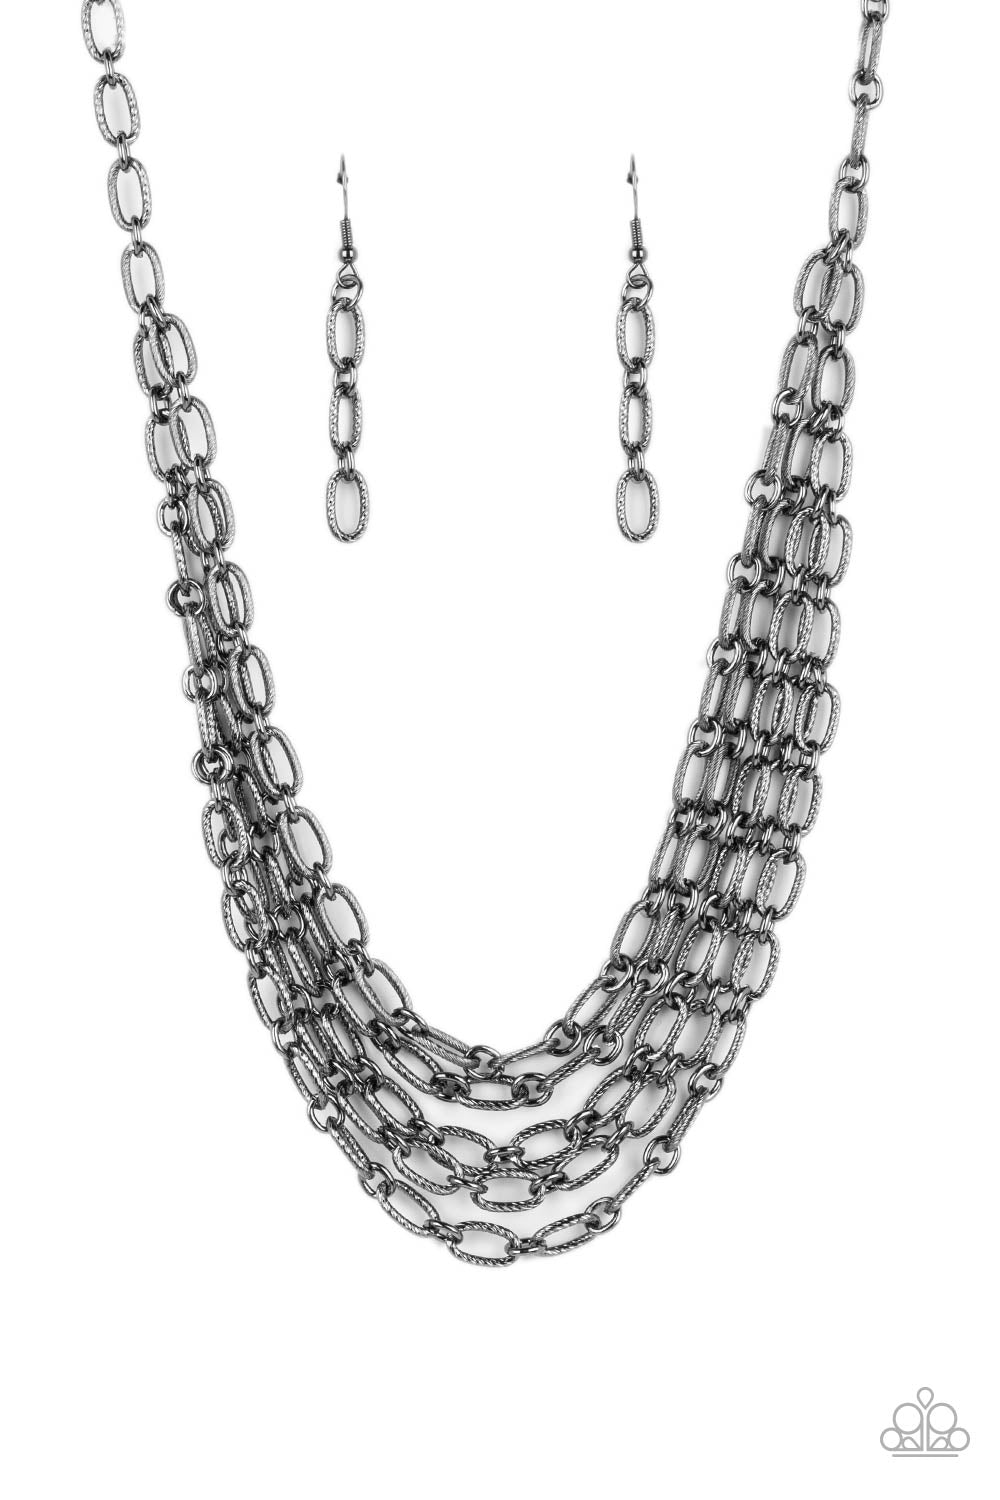 House of CHAIN Paparazzi Accessories Necklace with Earrings Black